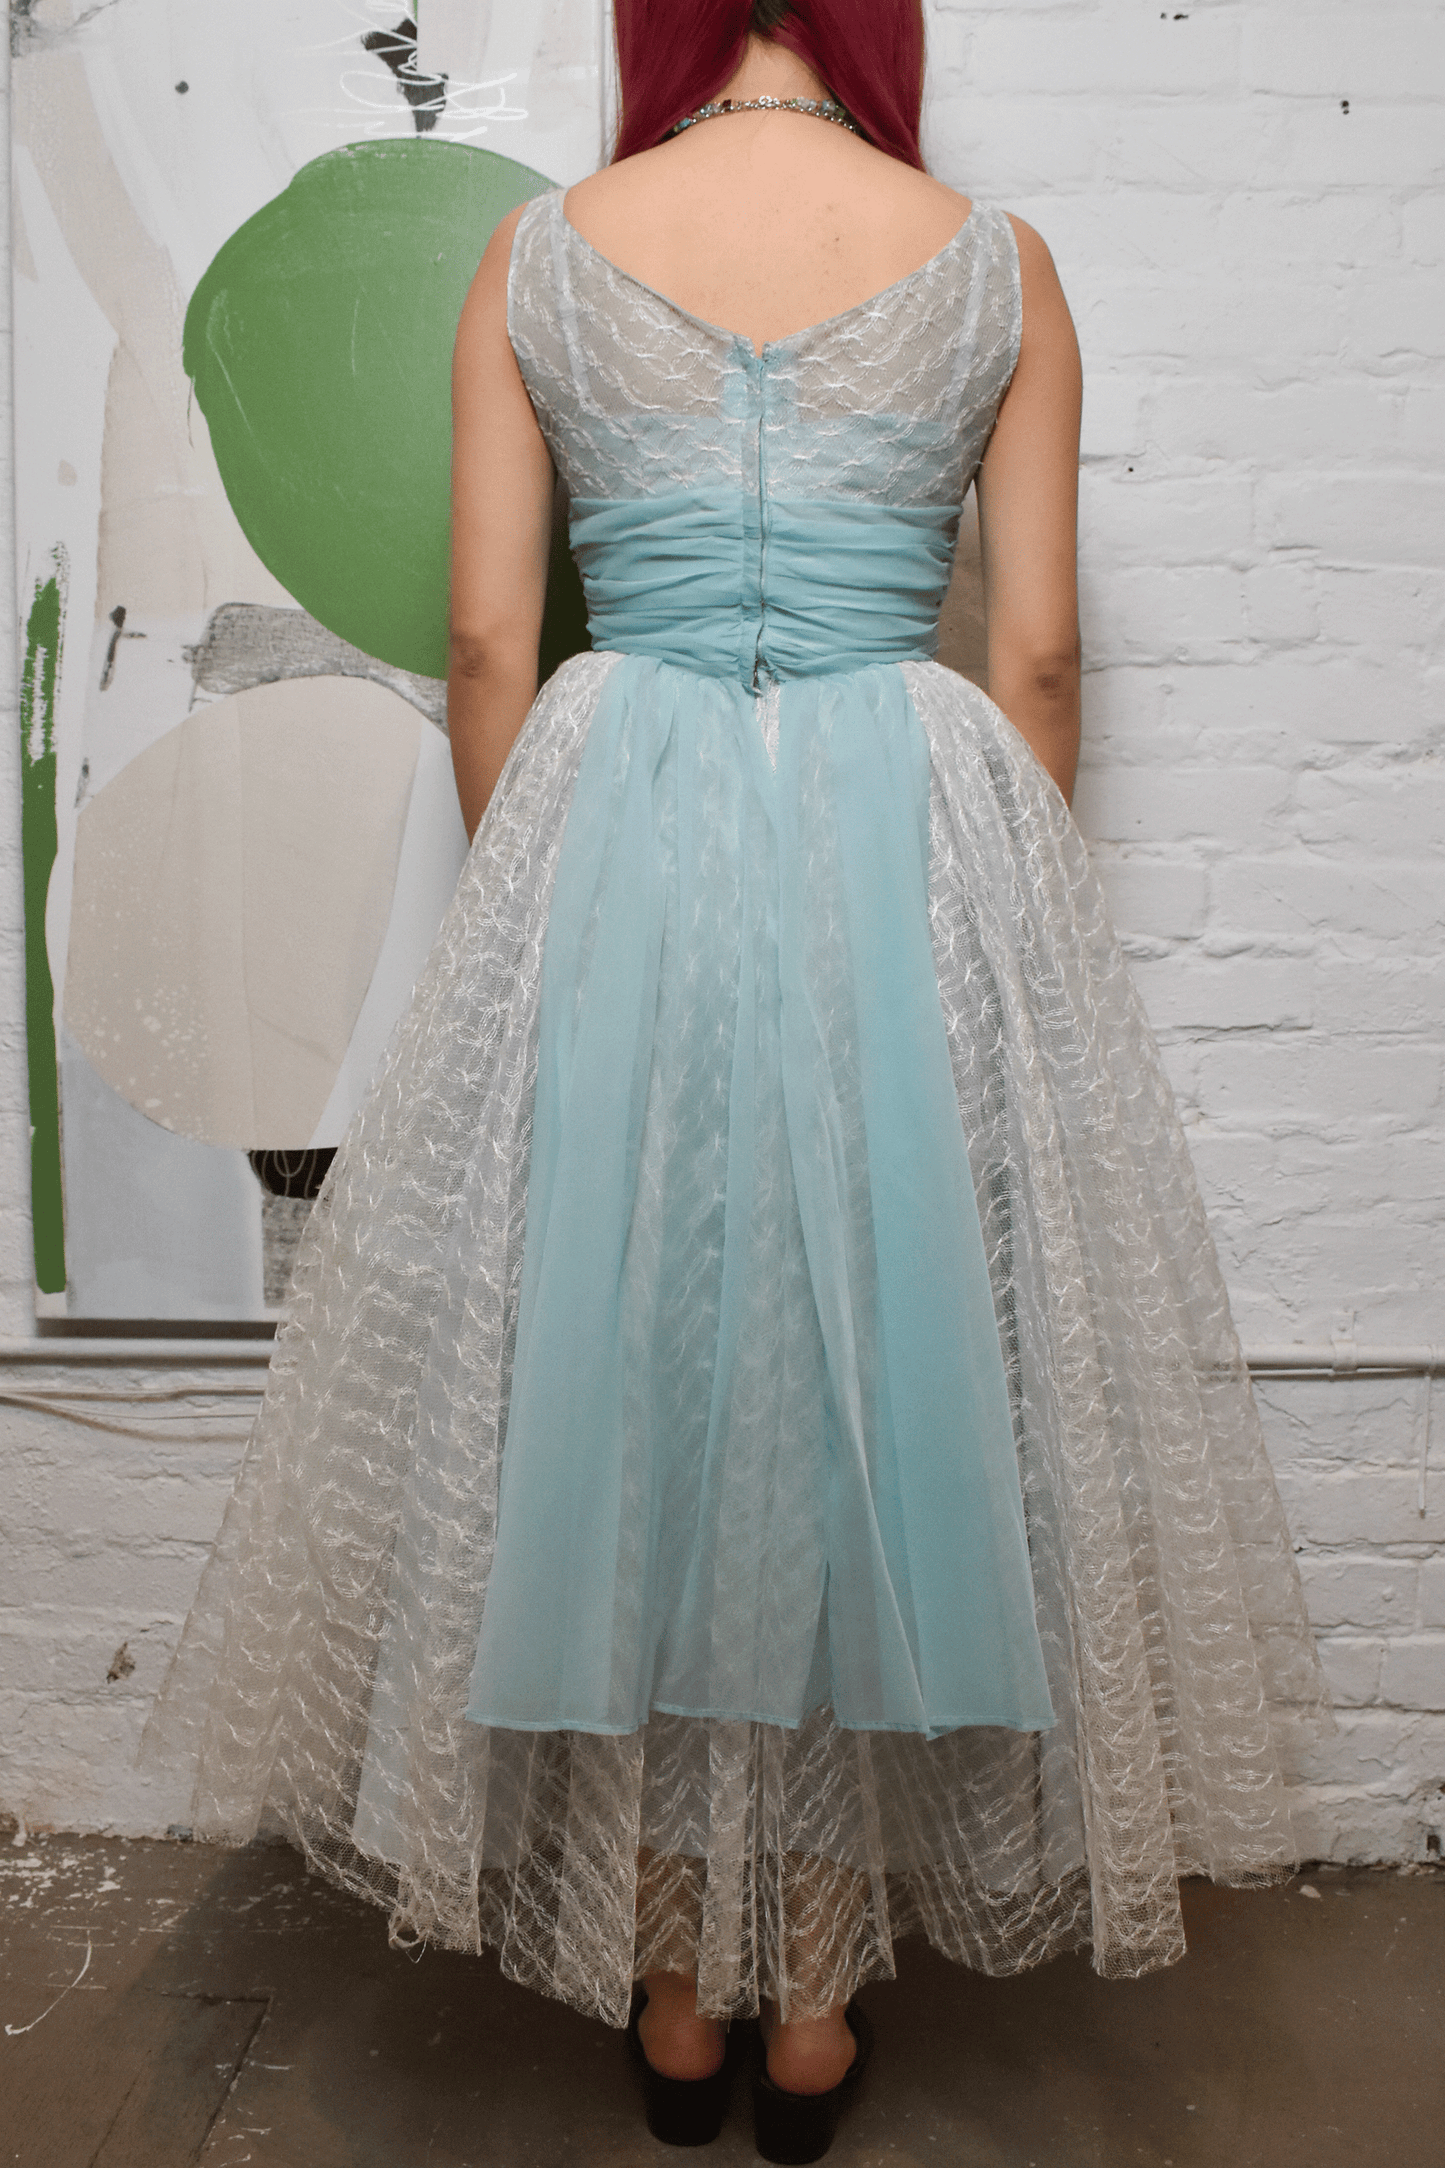 Vintage 1960s Baby Blue Tulle Mesh Princess Gown Dress